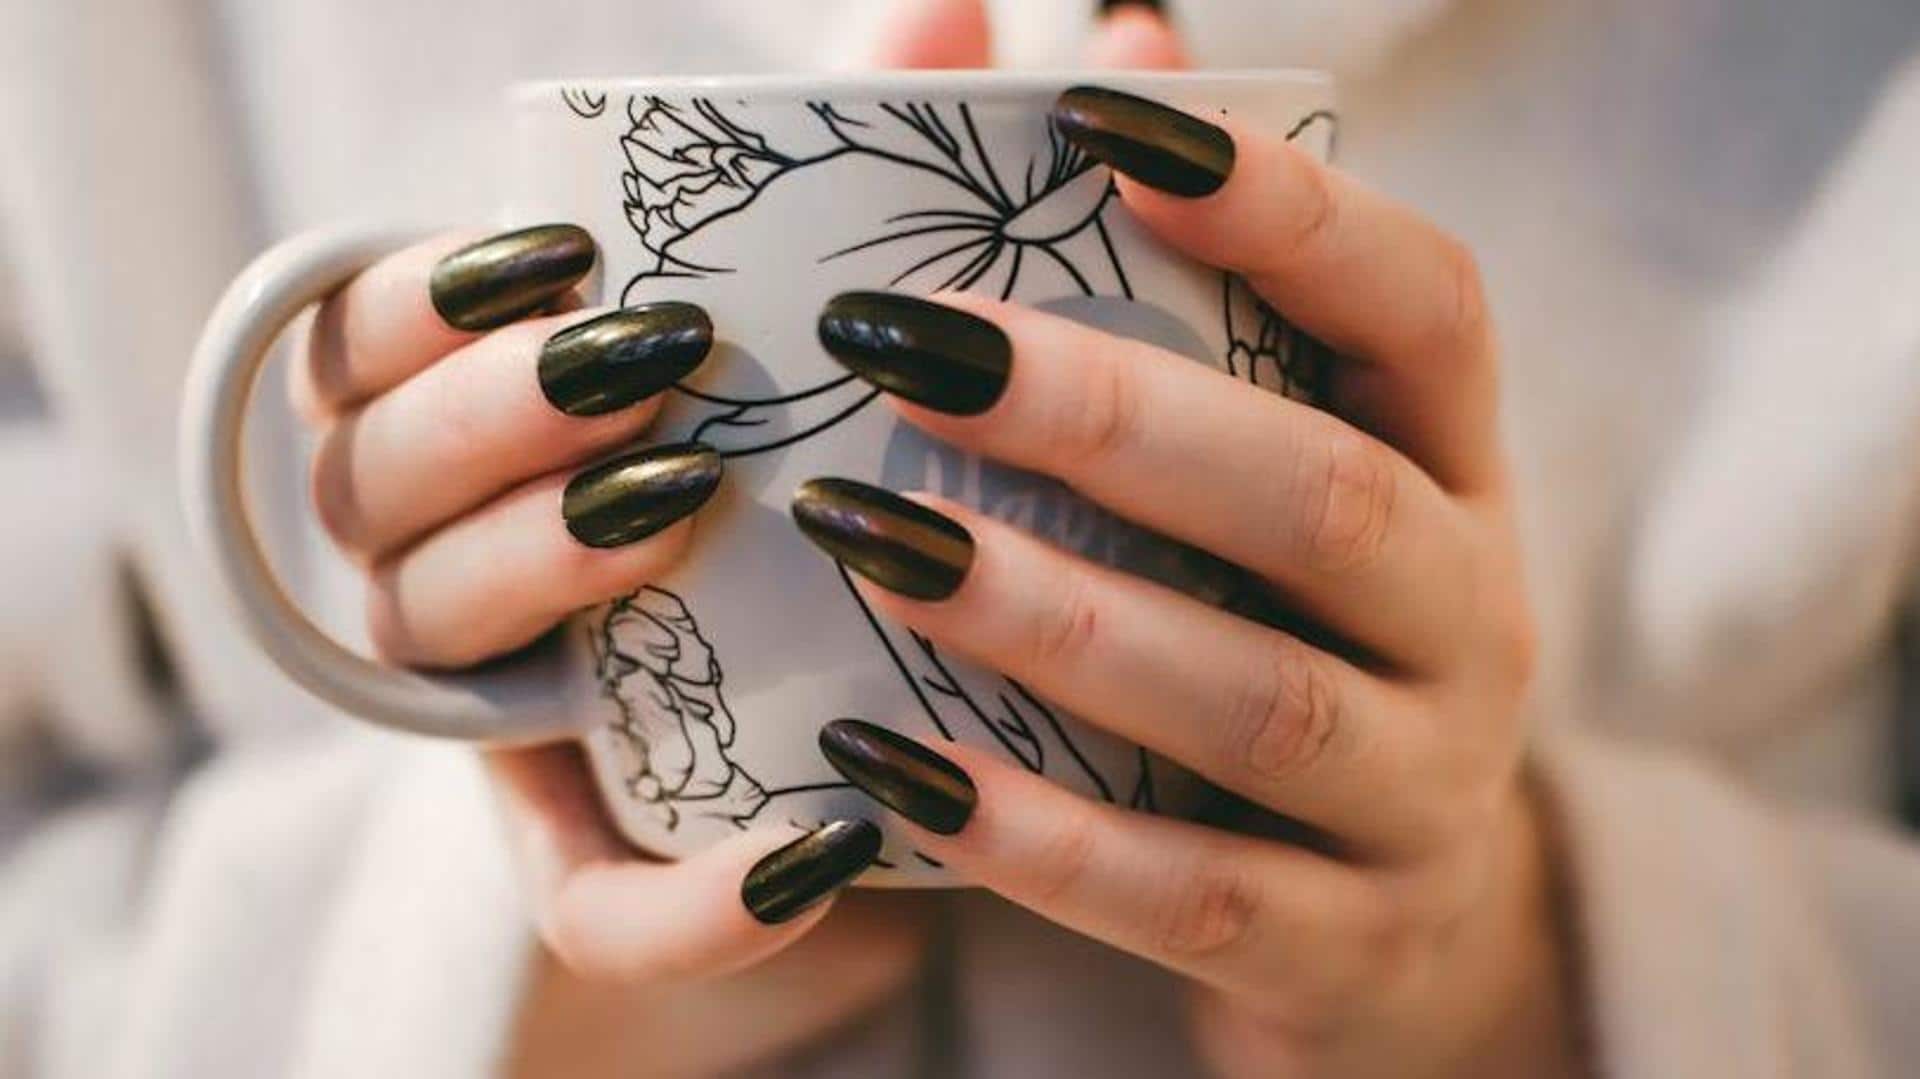 20 BEST NAIL TRENDS OF SUMMER 2022 - Goat Nails